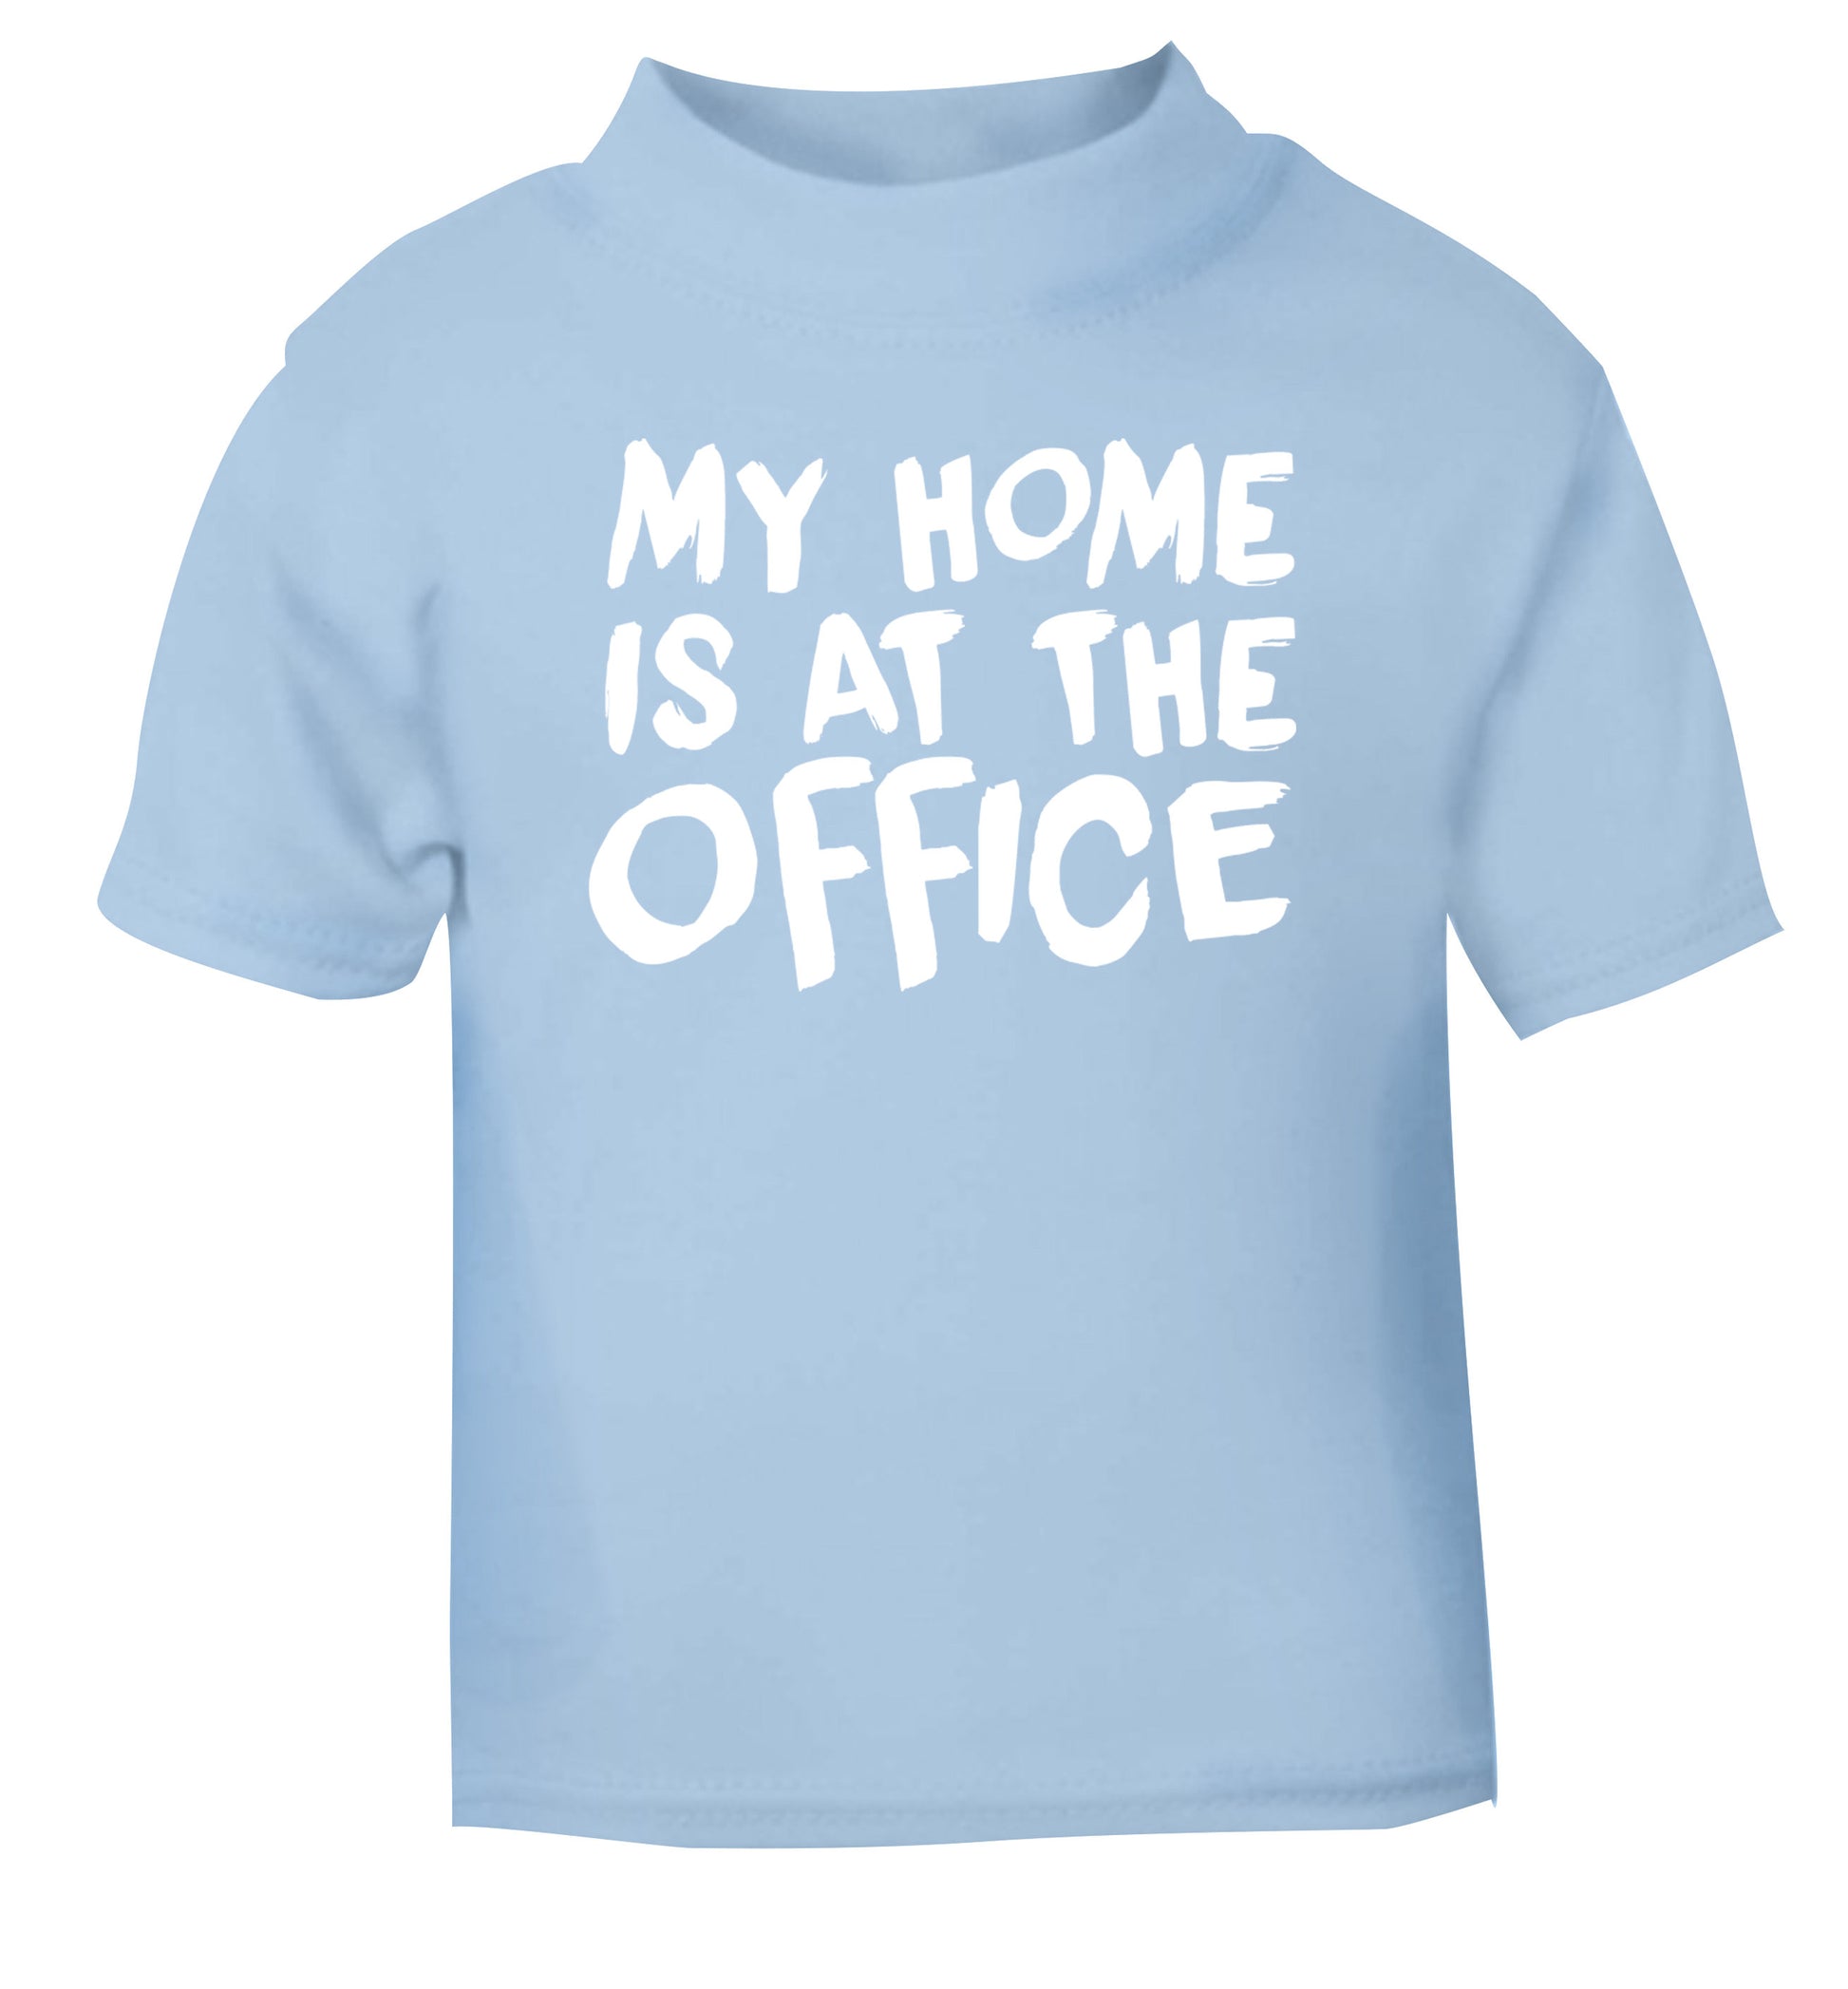 My home is at the office light blue Baby Toddler Tshirt 2 Years